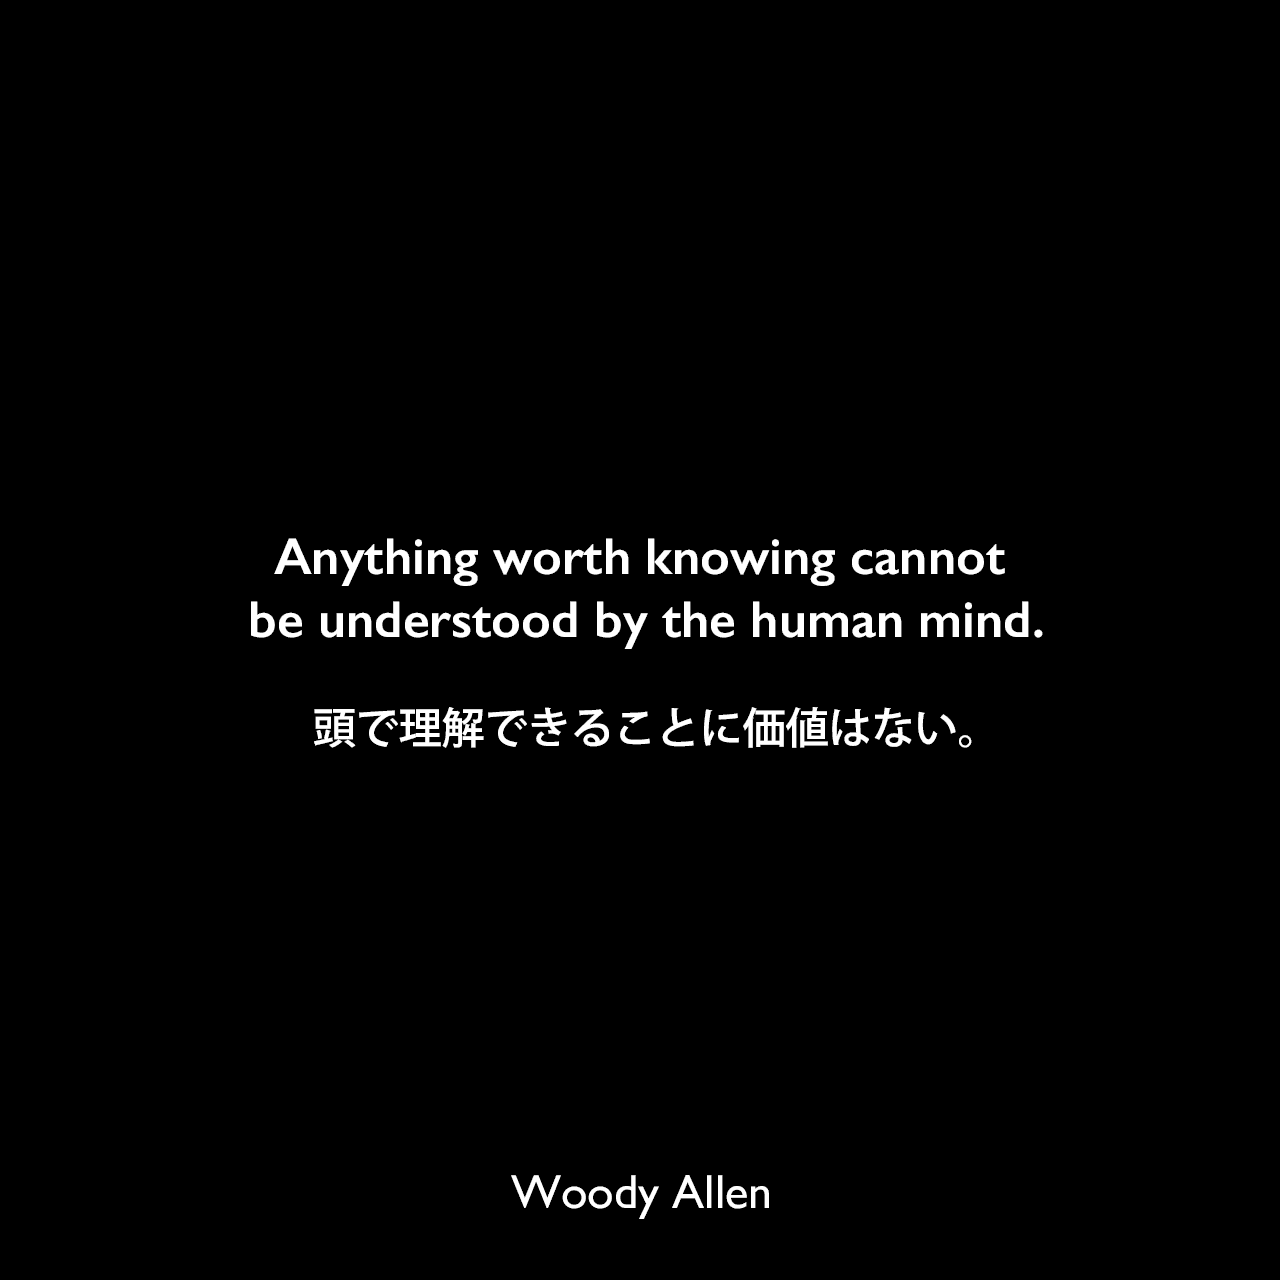 Anything worth knowing cannot be understood by the human mind.頭で理解できることに価値はない。Woody Allen